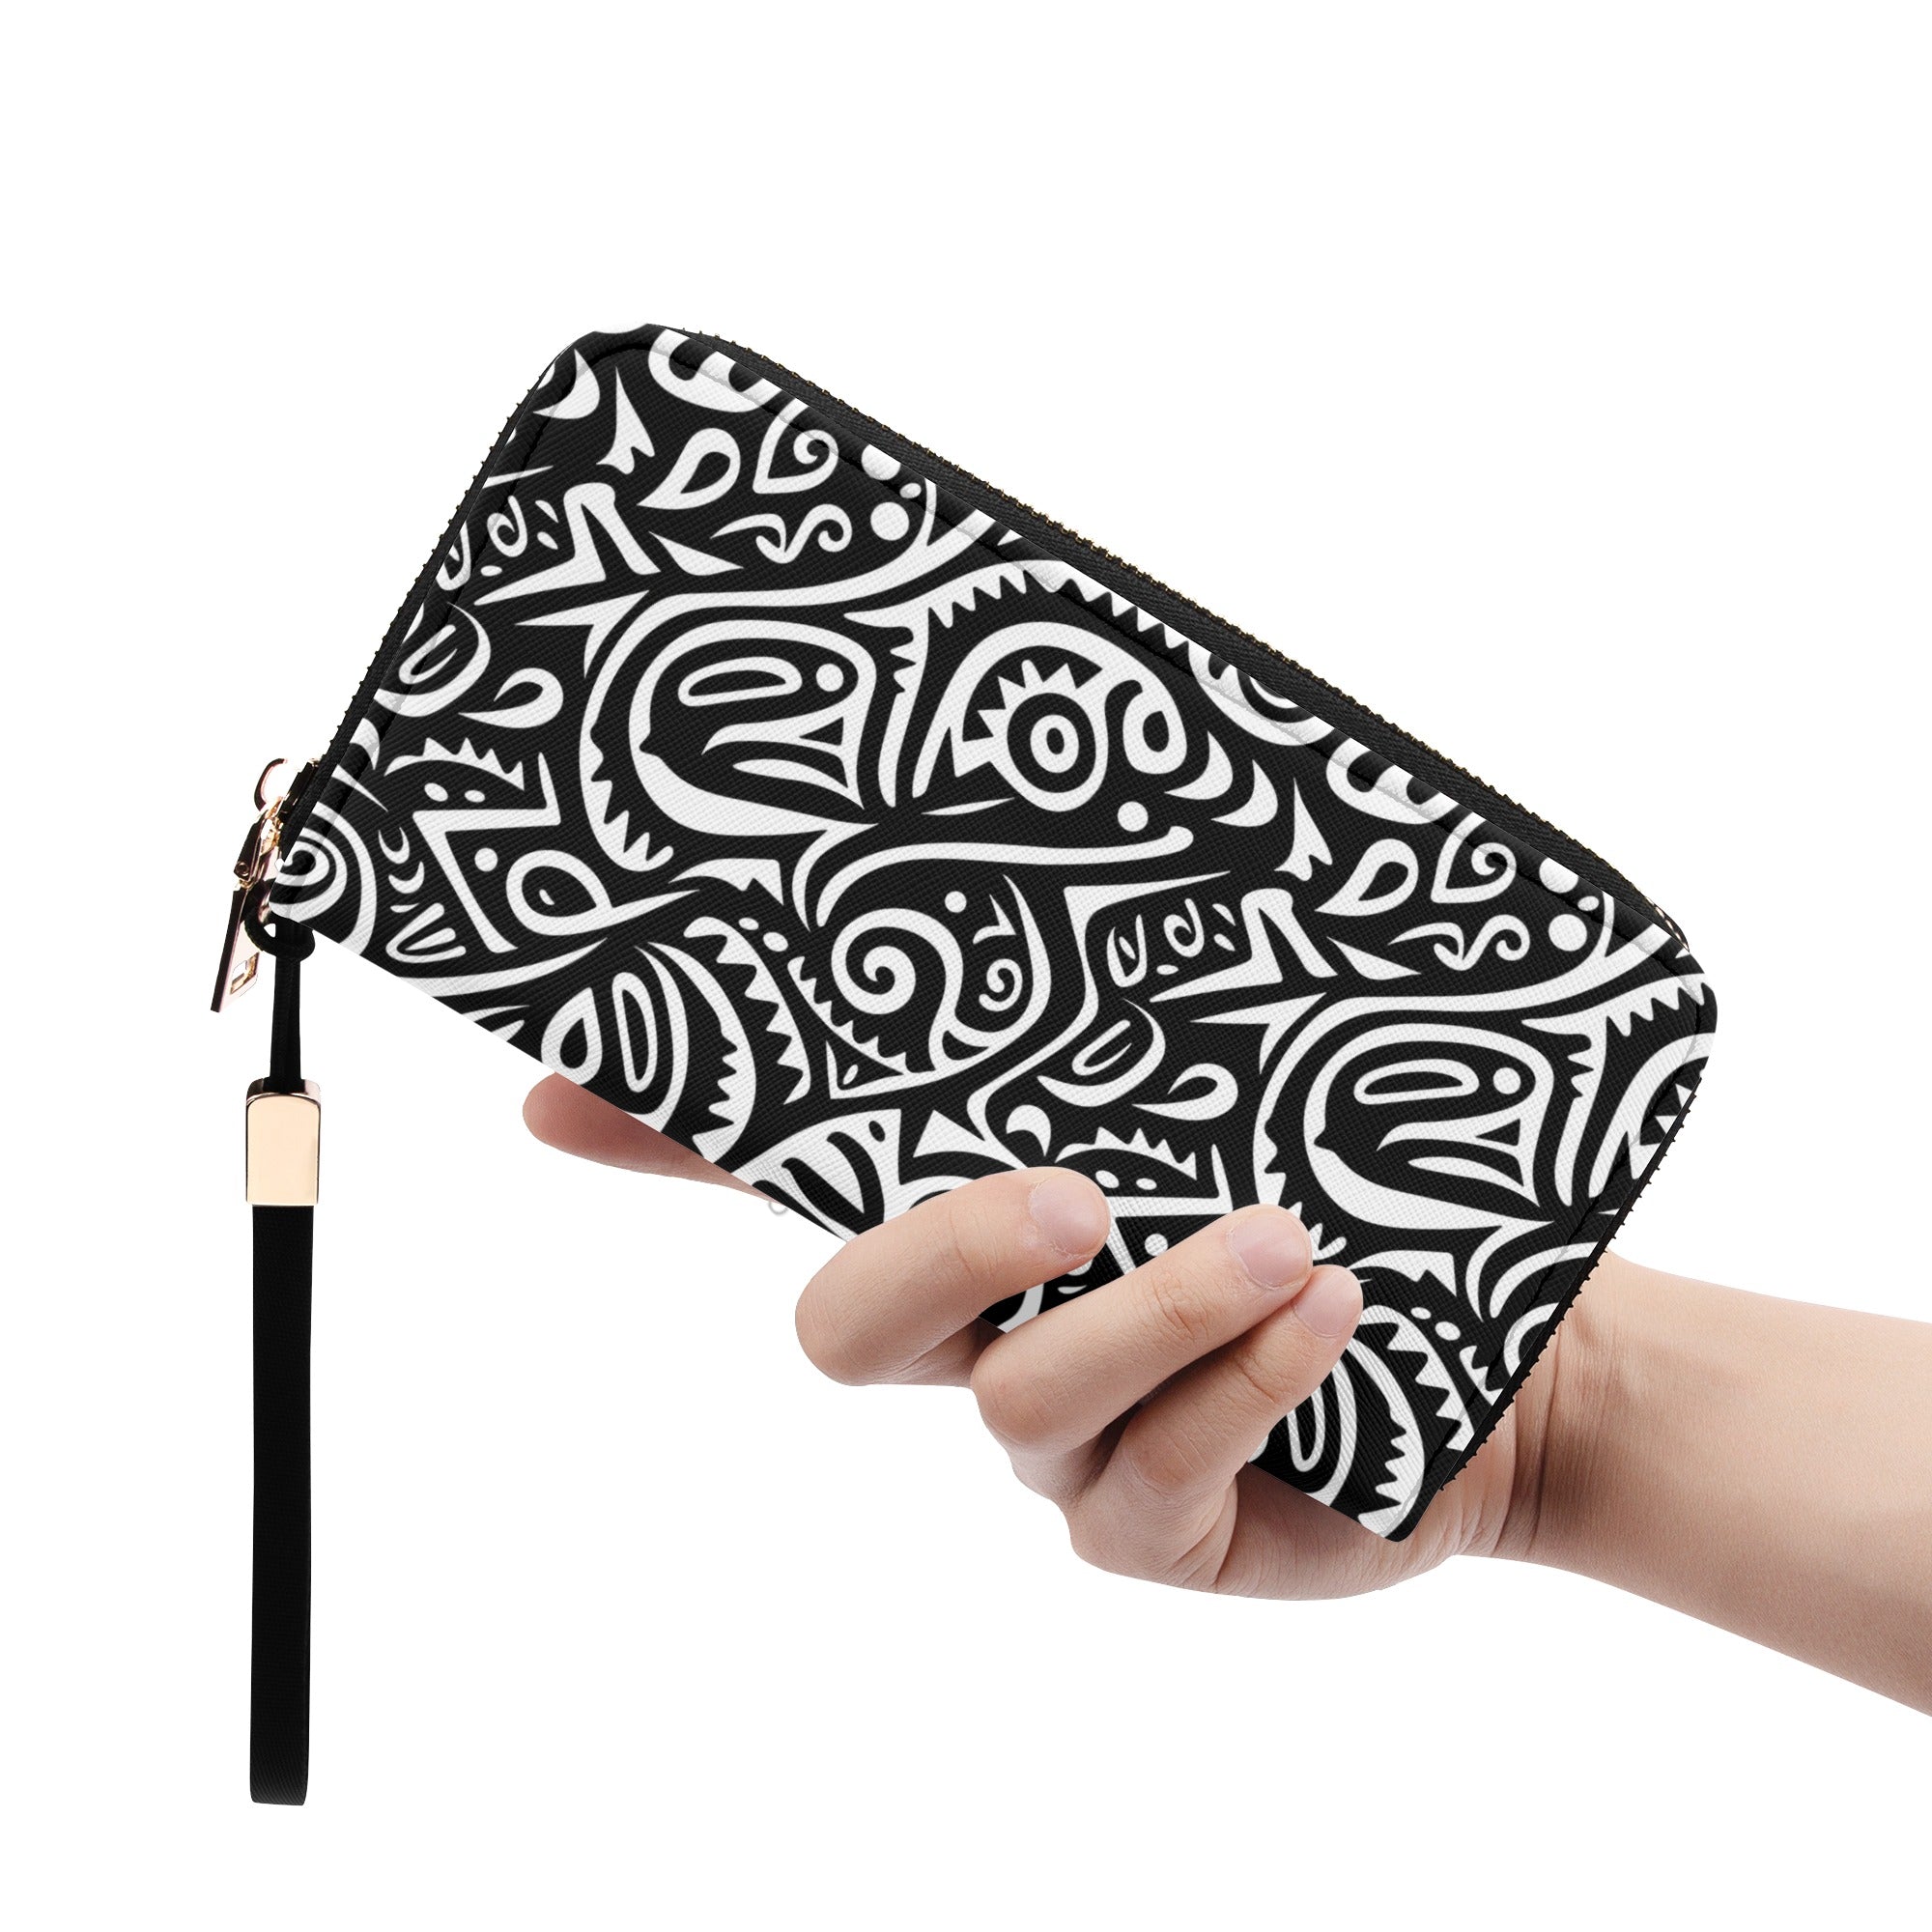 Papuan-Inspired Patterned Art Wallet